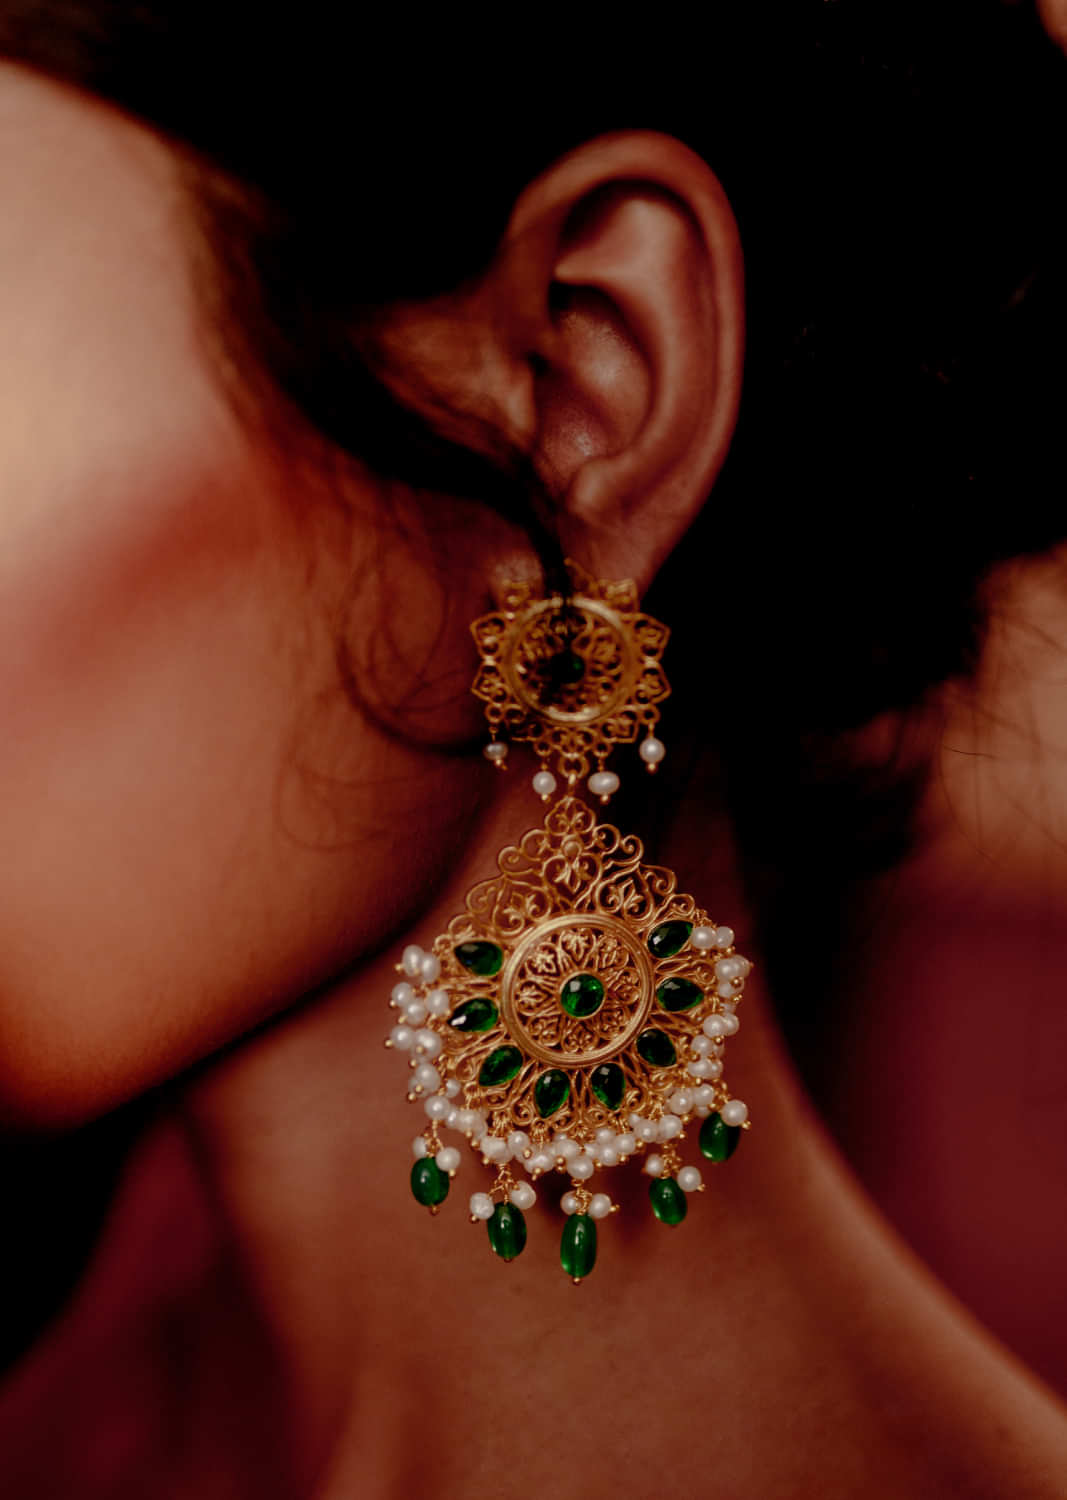 Green Petal Shaped Earrings With Cz Stones, Green Onyx And Pearls By Zariin